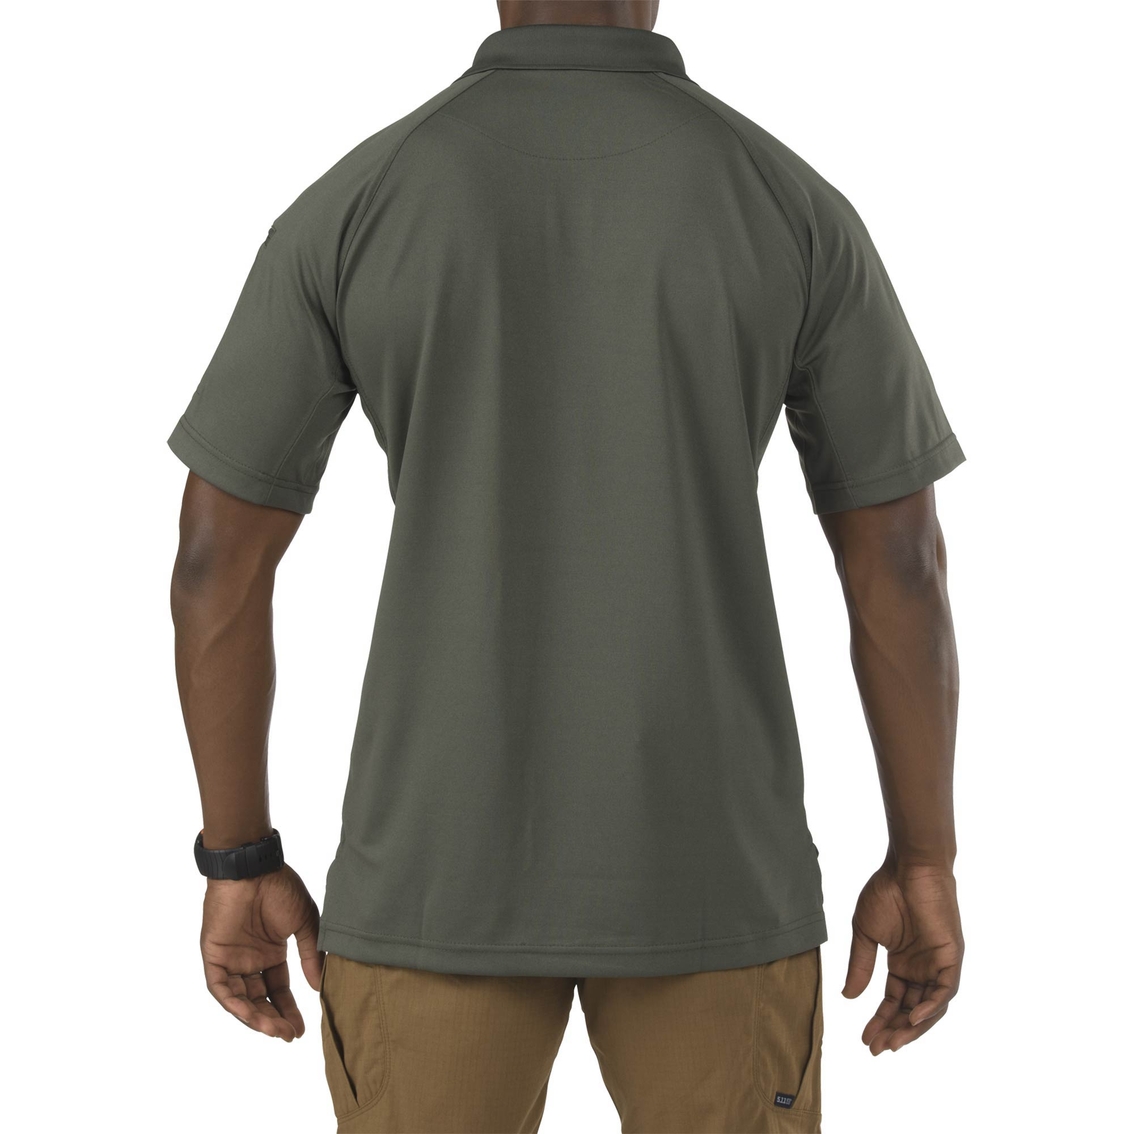 5.11 Performance Polo - Image 2 of 2